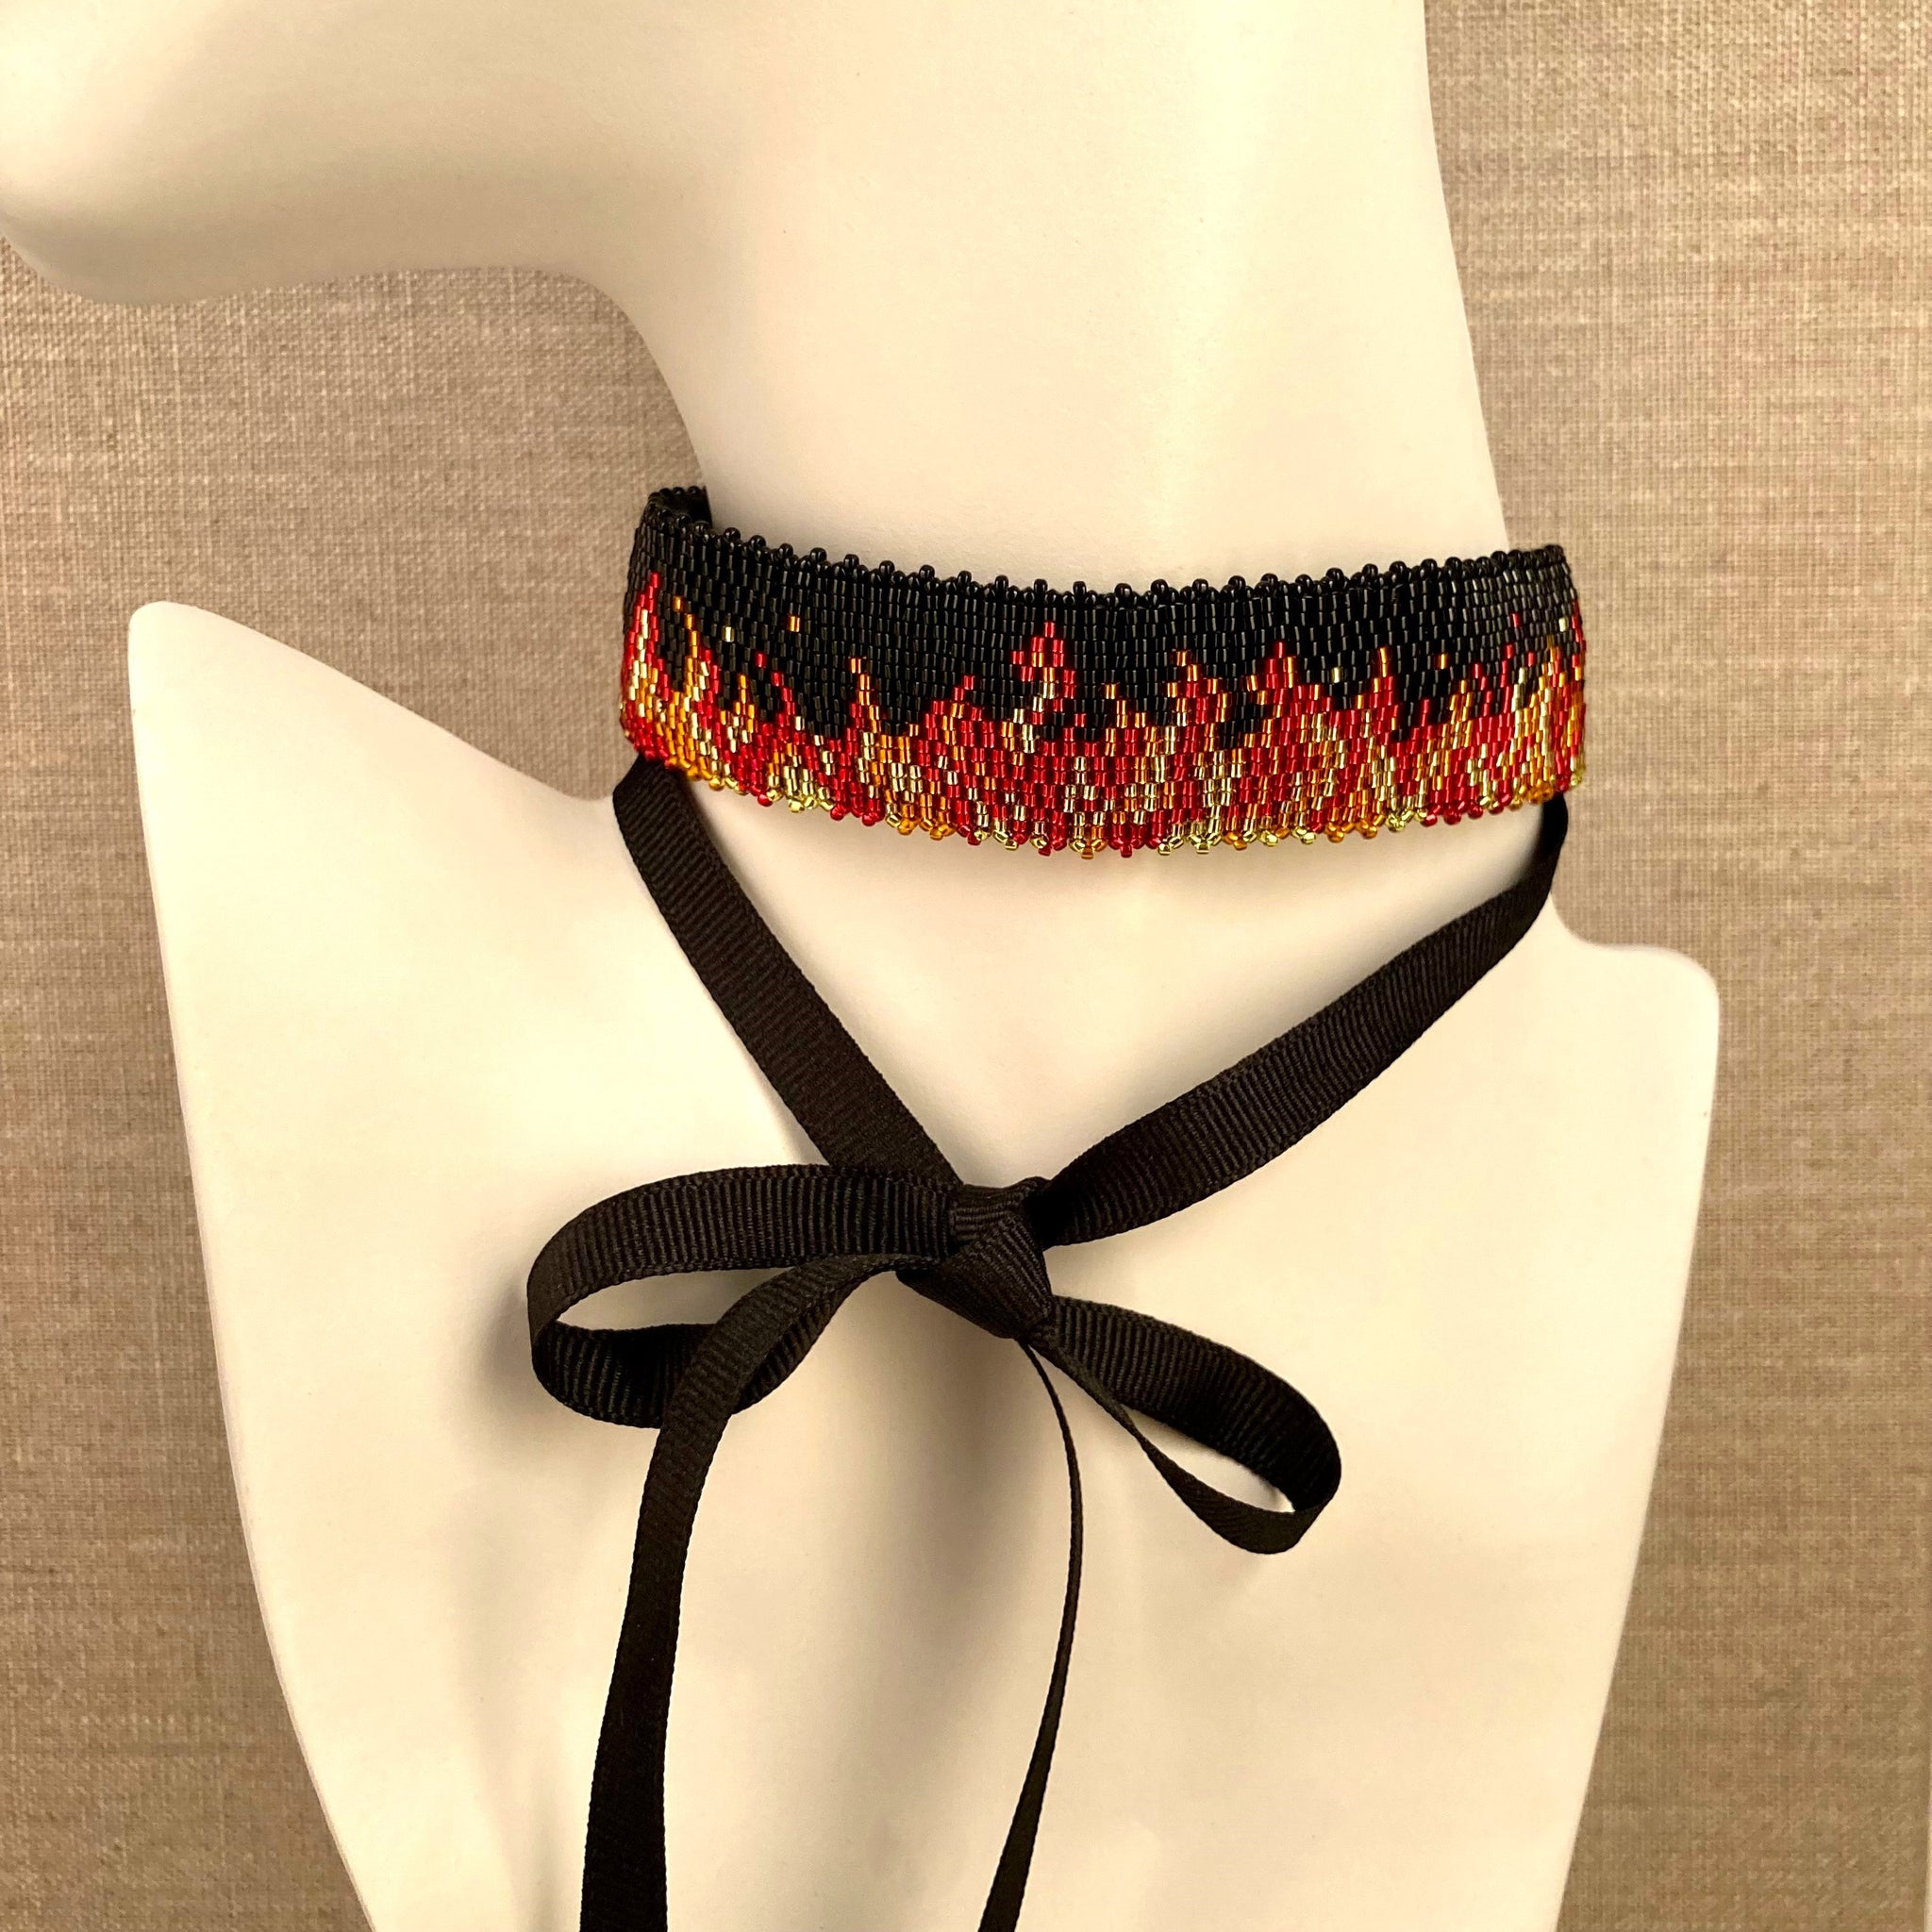 Beaded Collar Fire Choker Peyote Wide ribbon Runway ELLE Ralph Lauren style elegant sophisticated classy daring original design Vogue Couture lariat Hot night club sexy one of a kind handmade Beaded By The Beach USA America made